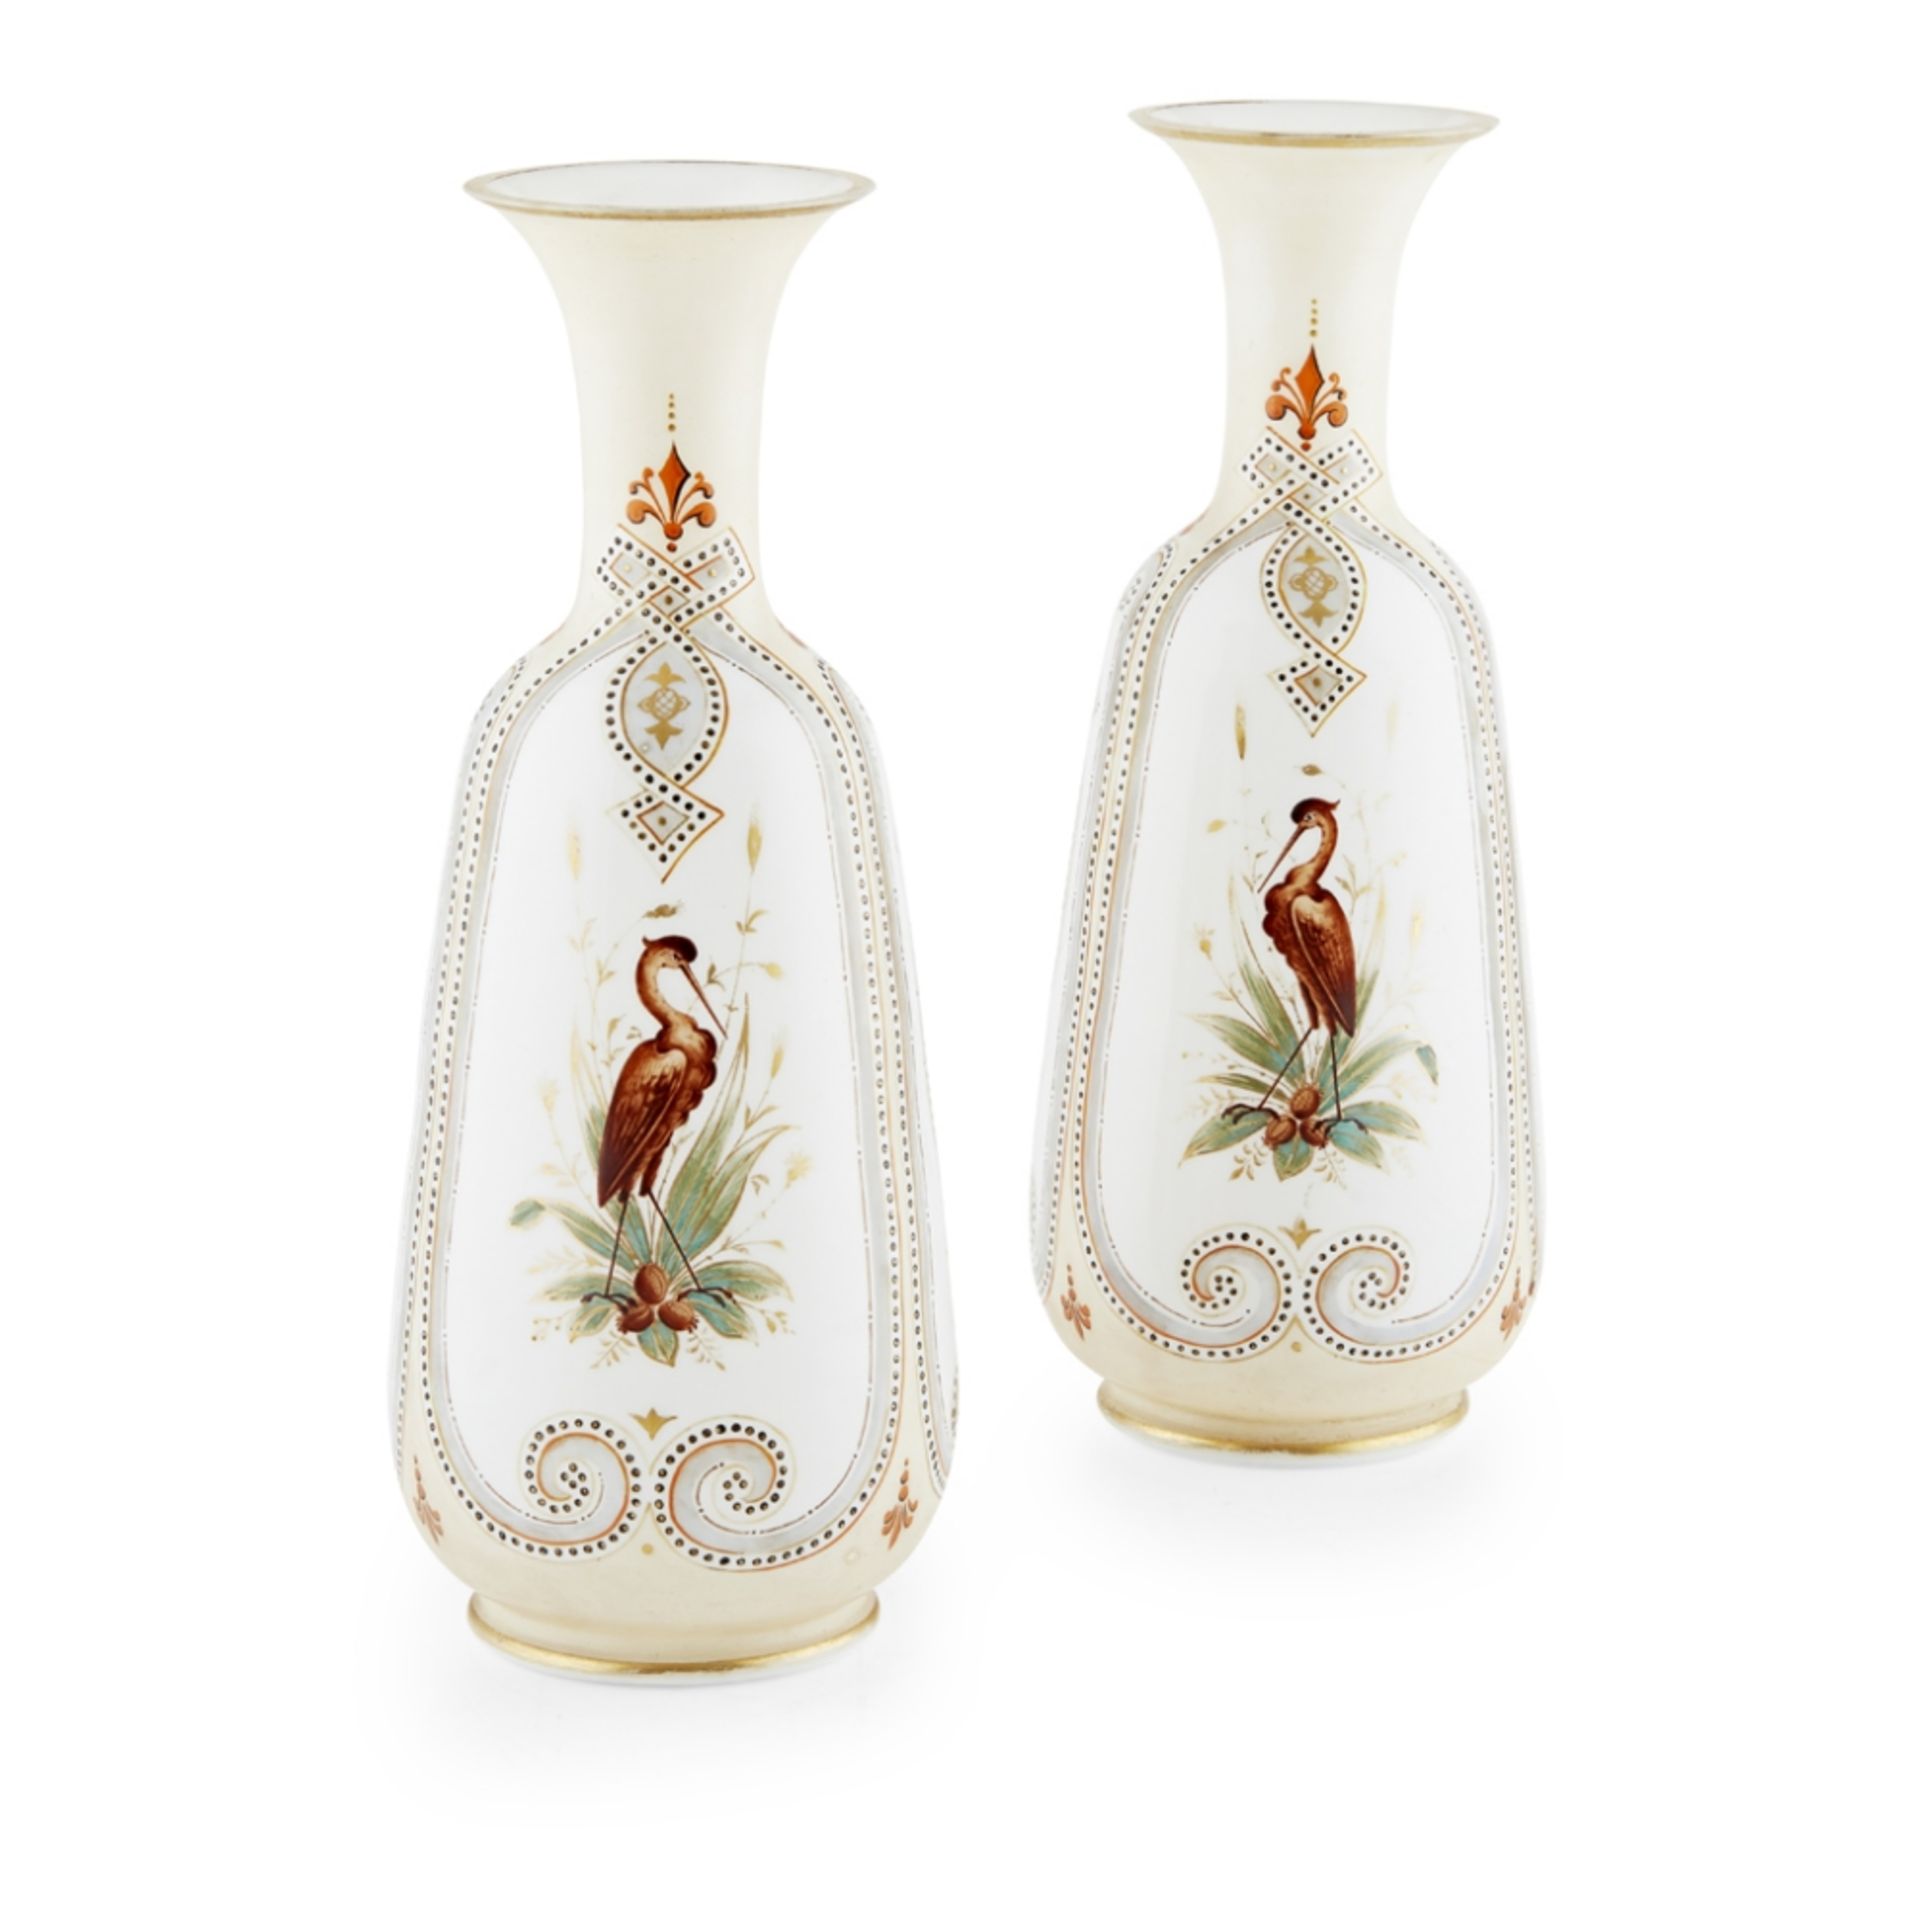 PAIR OF FRENCH PAINTED OPALINE GLASS VASES19TH CENTURY with everted rims and slim necks